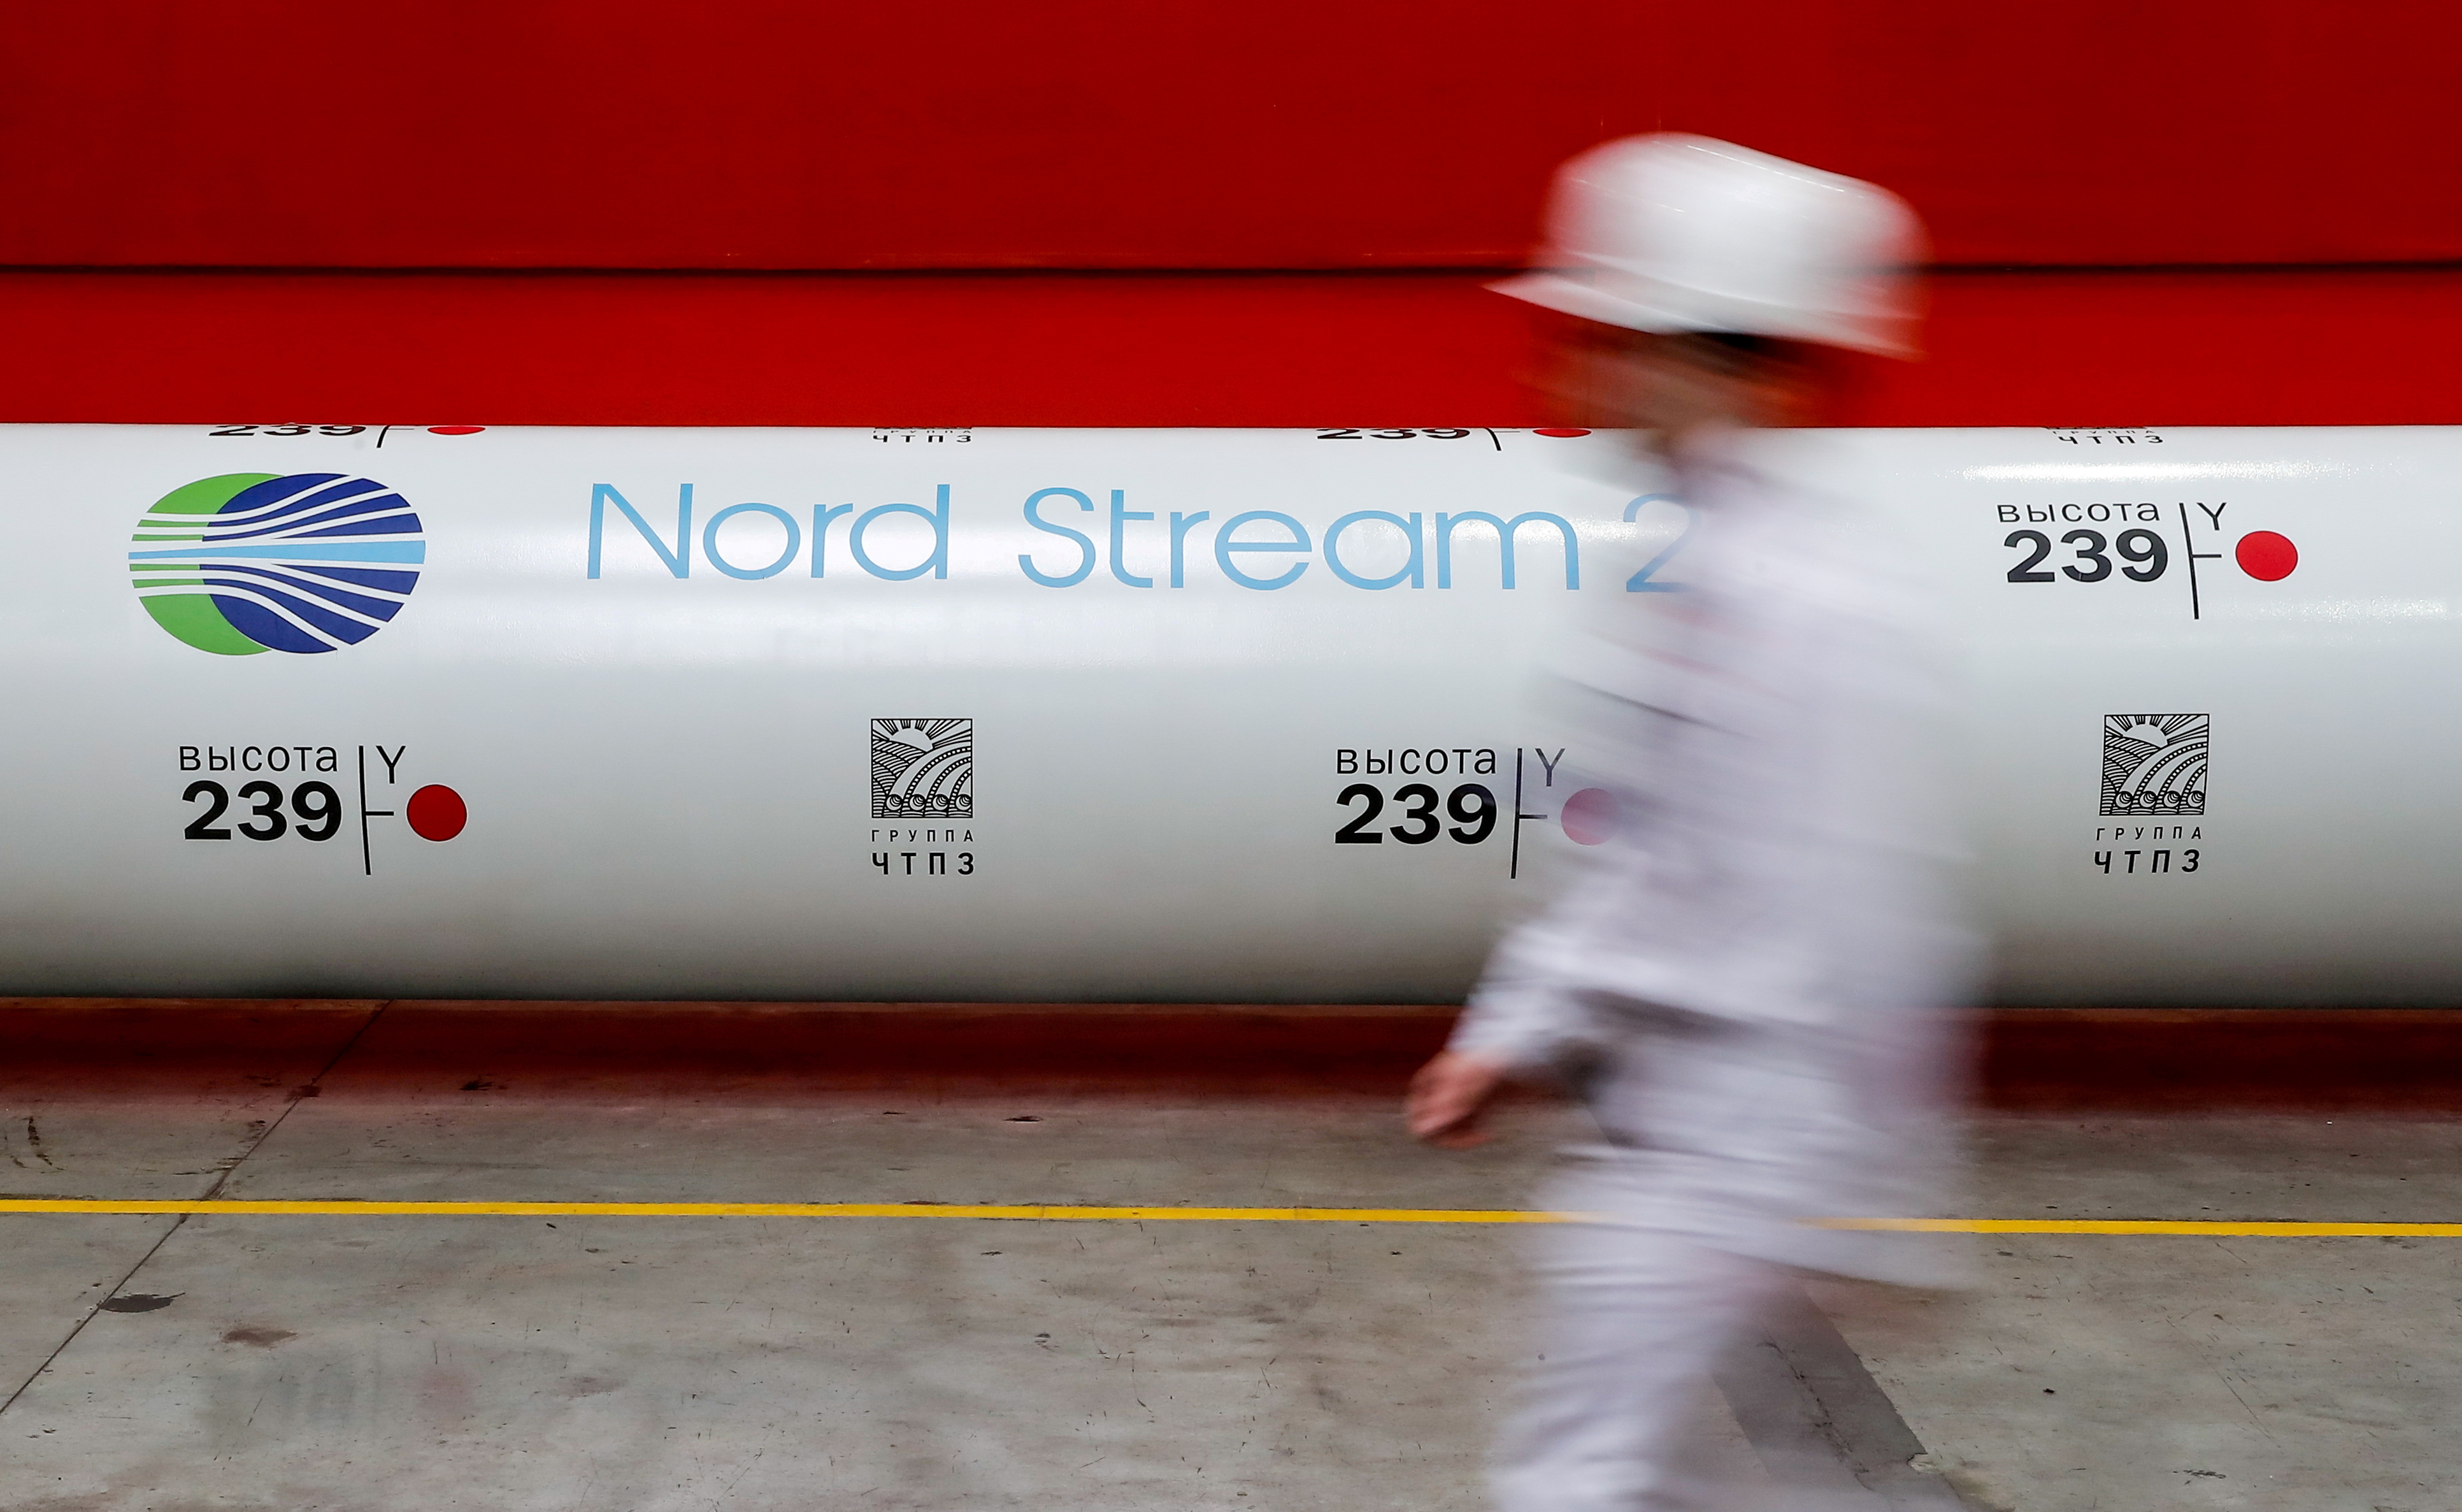 The logo of the Nord Stream 2 gas pipeline project is seen on a pipe at Chelyabinsk pipe rolling plant owned by ChelPipe Group in Chelyabinsk, Russia, February 26, 2020.  REUTERS/Maxim Shemetov